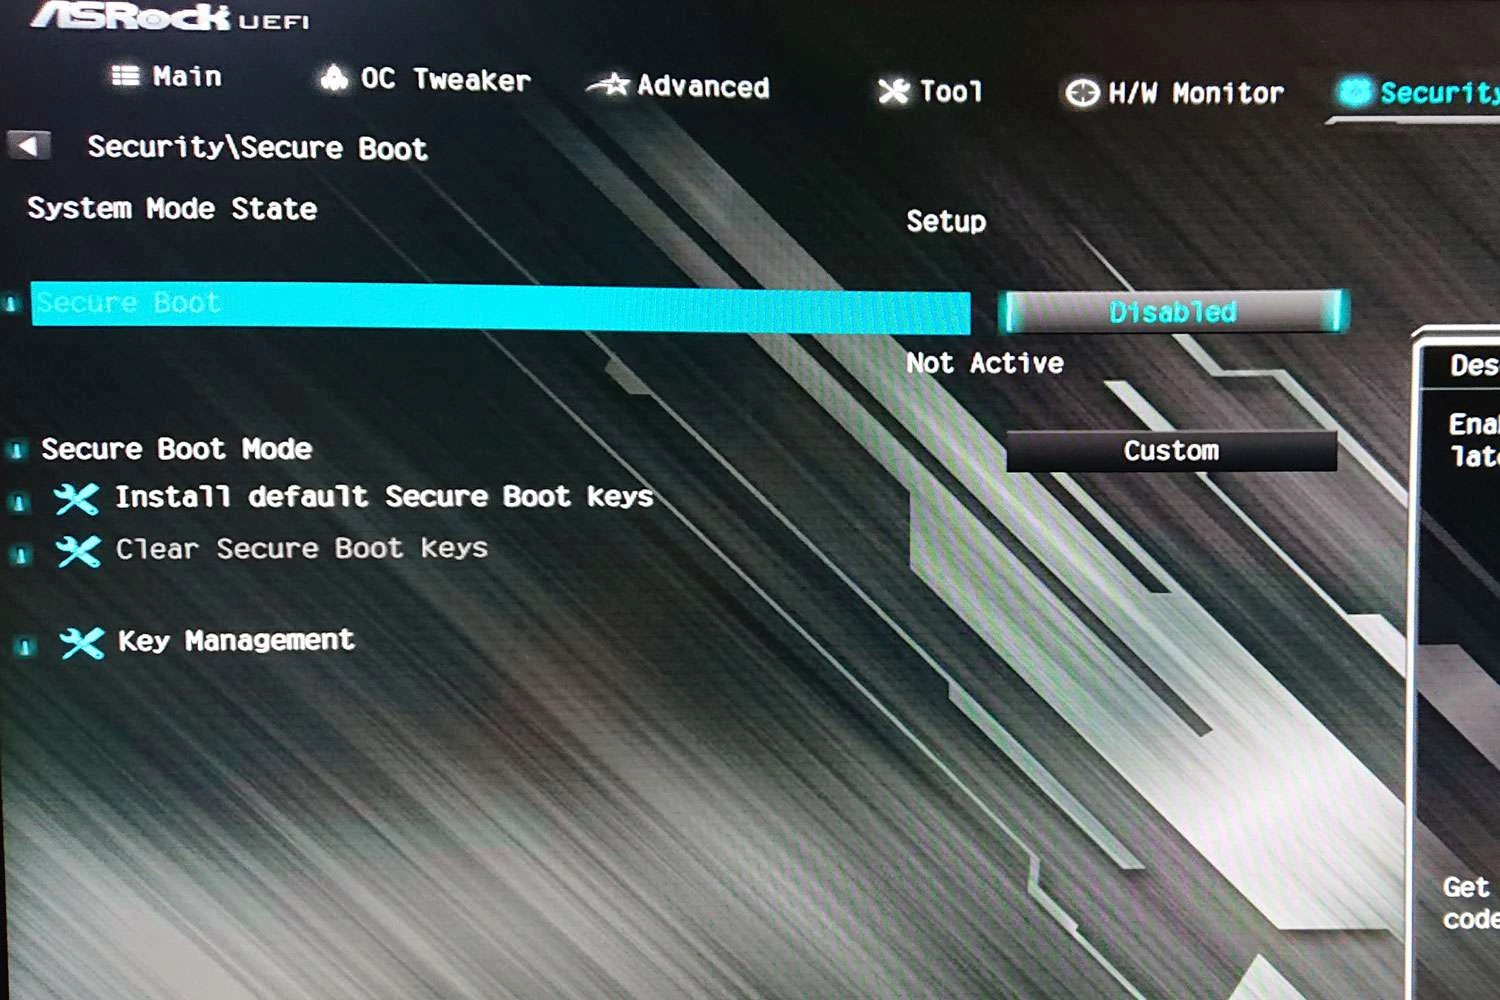 Disable Secure Boot on a Asrock PC